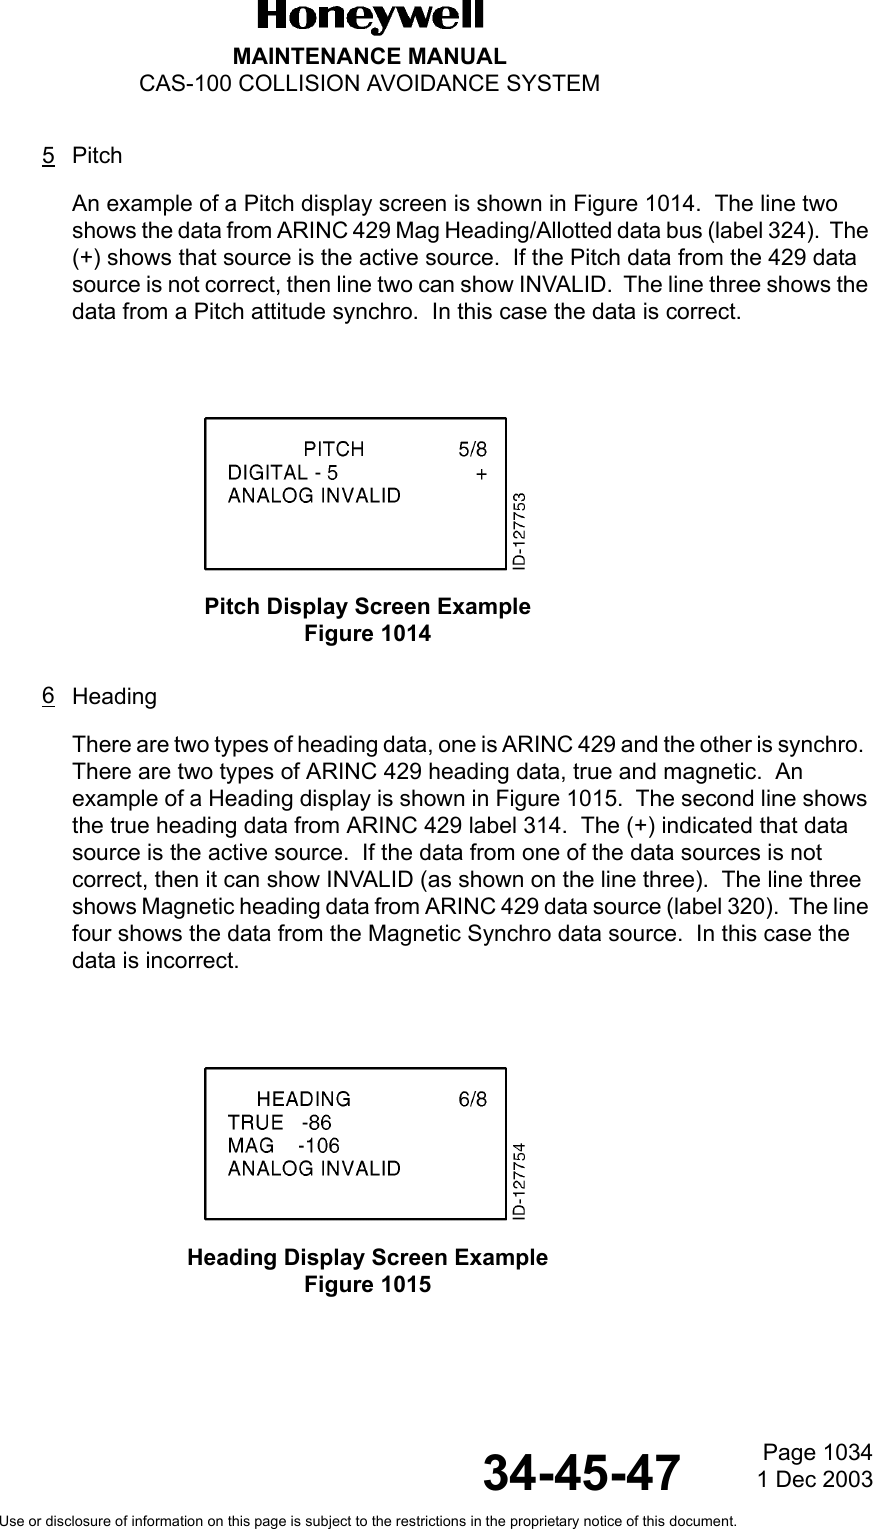 Page 10341 Dec 200334-45-47MAINTENANCE MANUALCAS-100 COLLISION AVOIDANCE SYSTEMUse or disclosure of information on this page is subject to the restrictions in the proprietary notice of this document.5PitchAn example of a Pitch display screen is shown in Figure 1014.  The line two shows the data from ARINC 429 Mag Heading/Allotted data bus (label 324).  The (+) shows that source is the active source.  If the Pitch data from the 429 data source is not correct, then line two can show INVALID.  The line three shows the data from a Pitch attitude synchro.  In this case the data is correct.  Pitch Display Screen ExampleFigure 1014 6HeadingThere are two types of heading data, one is ARINC 429 and the other is synchro.  There are two types of ARINC 429 heading data, true and magnetic.  An example of a Heading display is shown in Figure 1015.  The second line shows the true heading data from ARINC 429 label 314.  The (+) indicated that data source is the active source.  If the data from one of the data sources is not correct, then it can show INVALID (as shown on the line three).  The line three shows Magnetic heading data from ARINC 429 data source (label 320).  The line four shows the data from the Magnetic Synchro data source.  In this case the data is incorrect.Heading Display Screen ExampleFigure 1015 